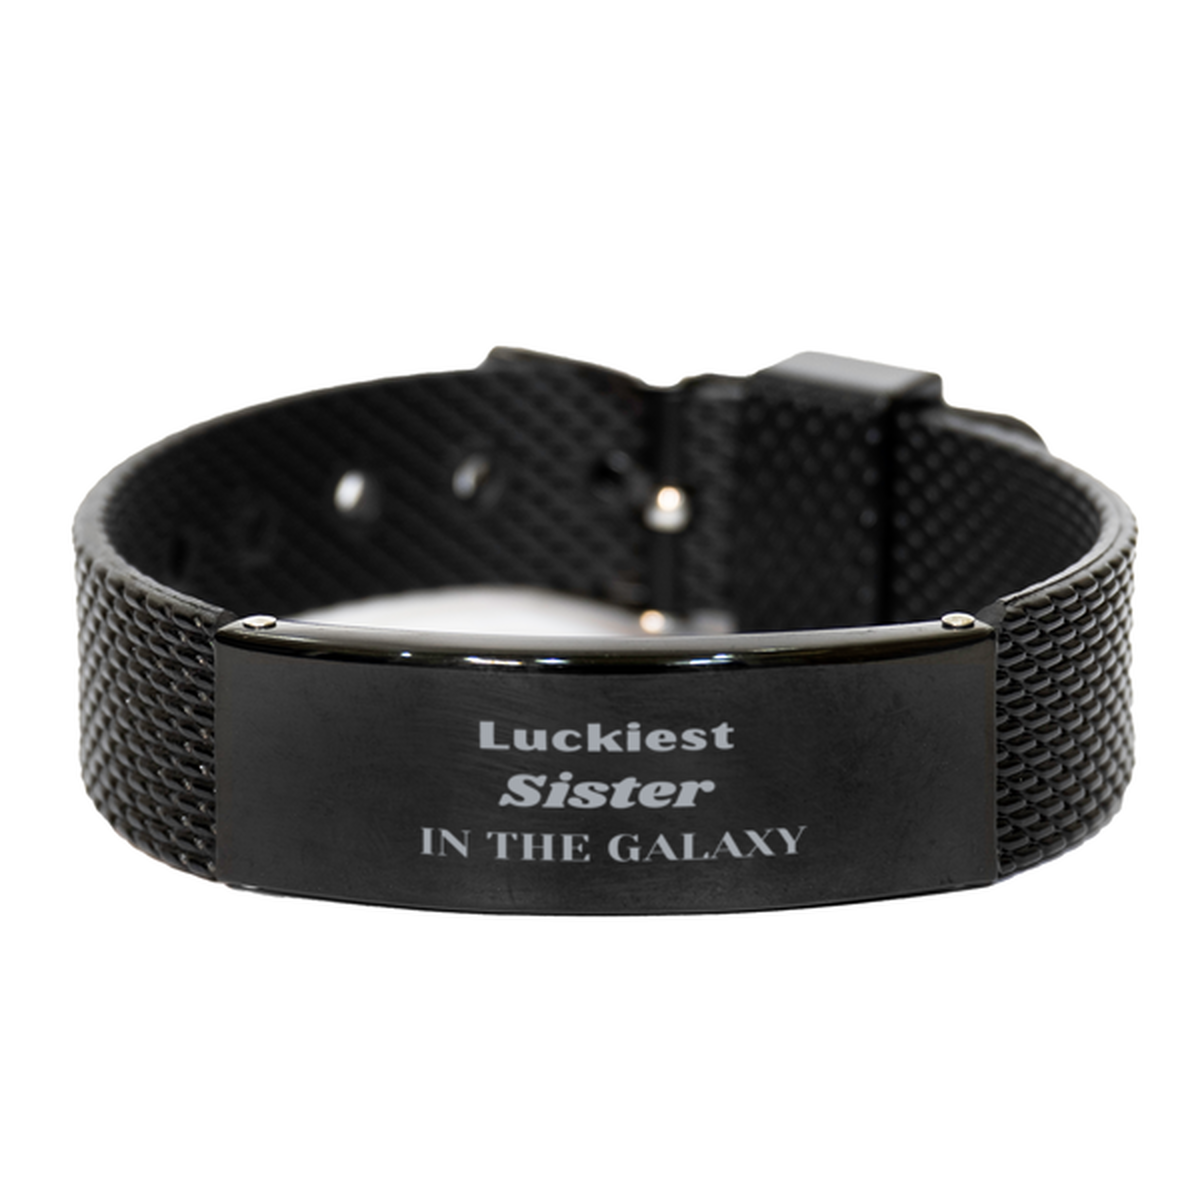 Luckiest Sister in the Galaxy, To My Sister Engraved Gifts, Christmas Sister Black Shark Mesh Bracelet Gifts, X-mas Birthday Unique Gifts For Sister Men Women